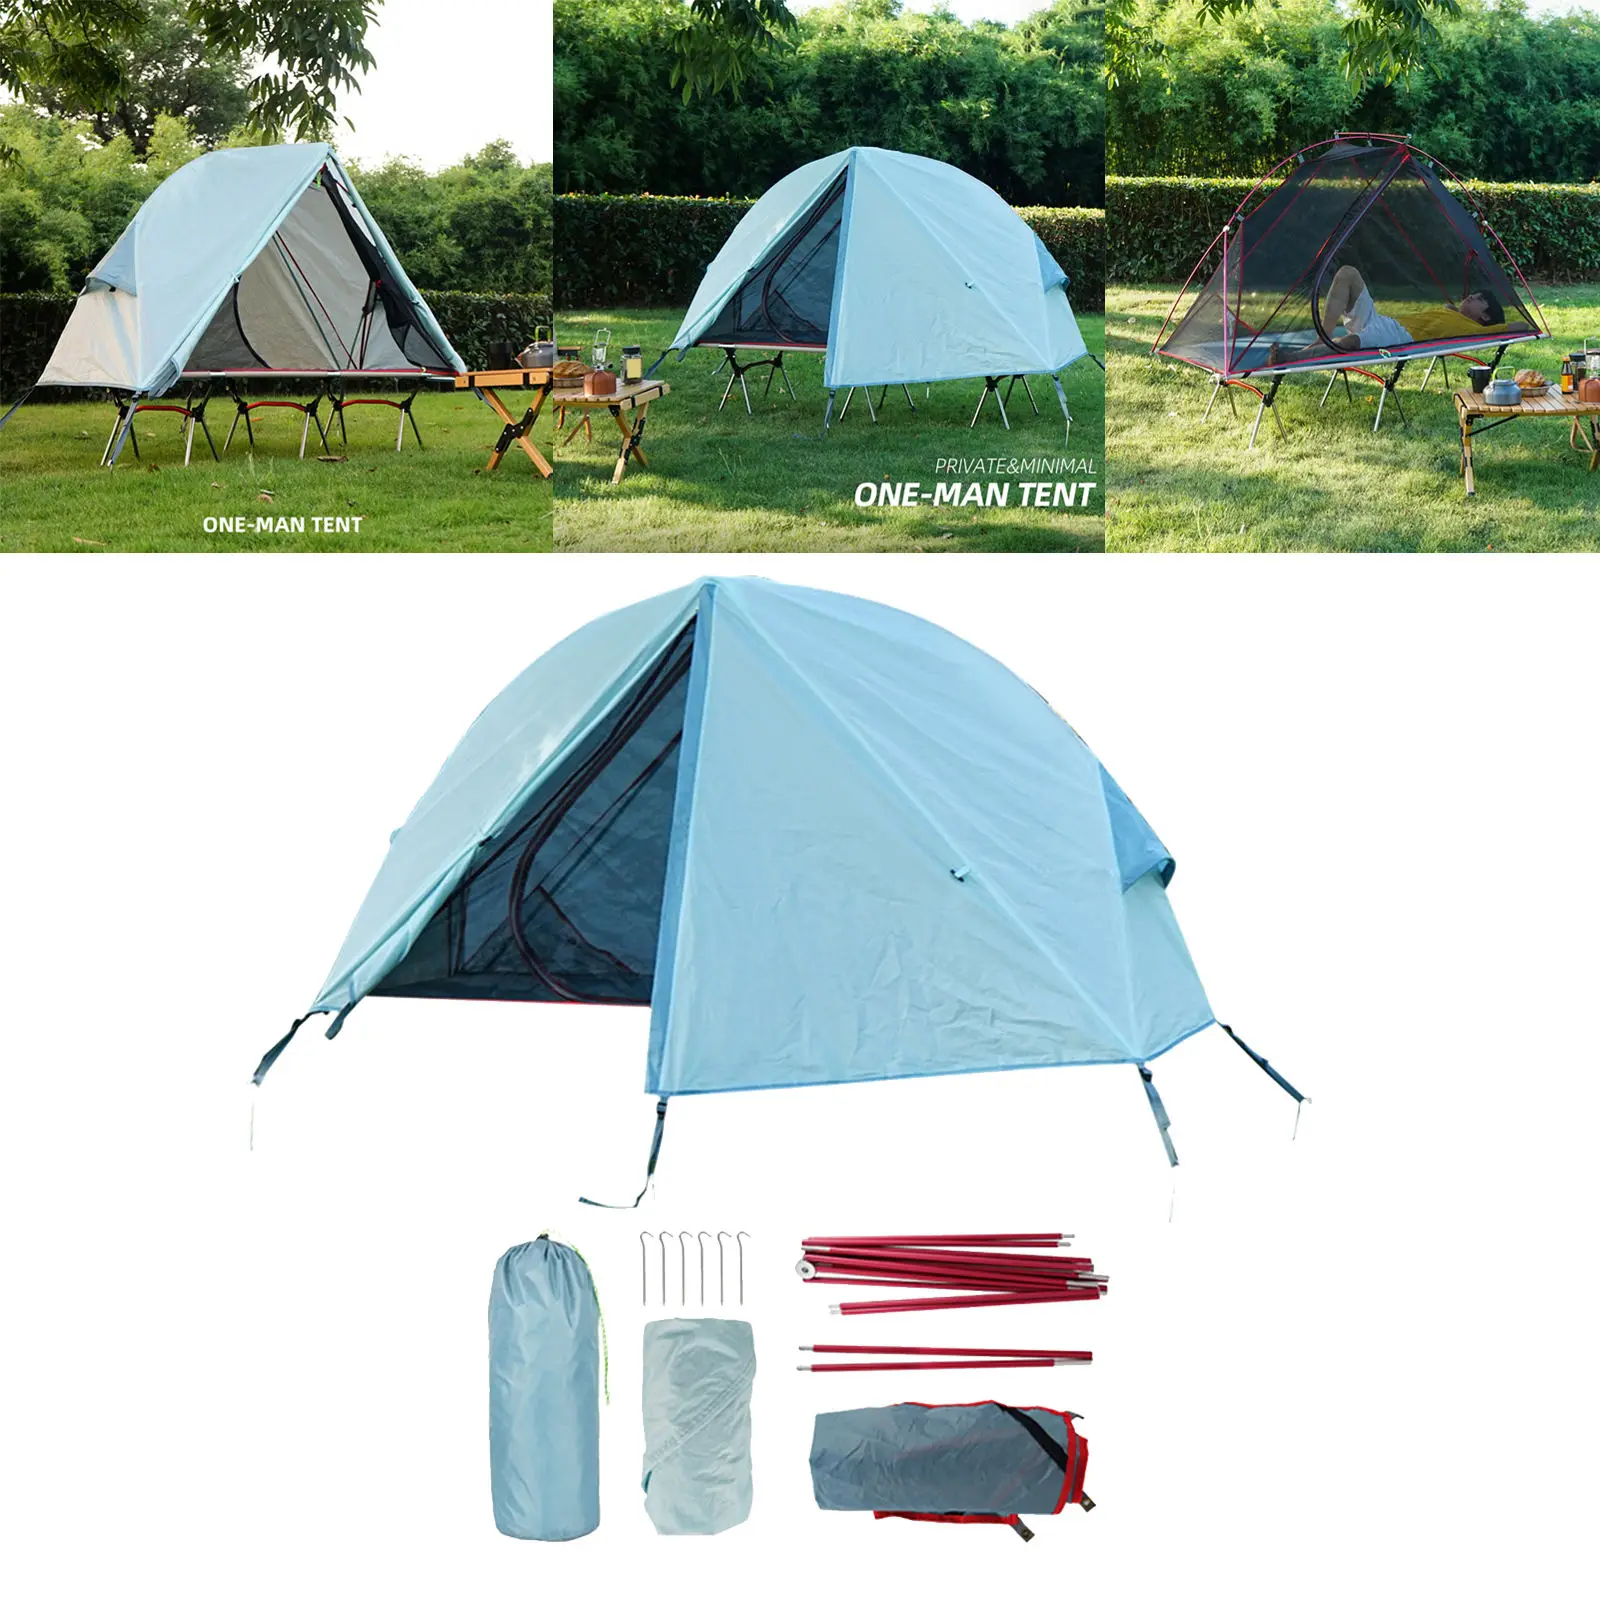 Camping Tent Double Layer Waterproof One Person Ultralight Family Tent Easy Set Up for Hiking Fishing Beach